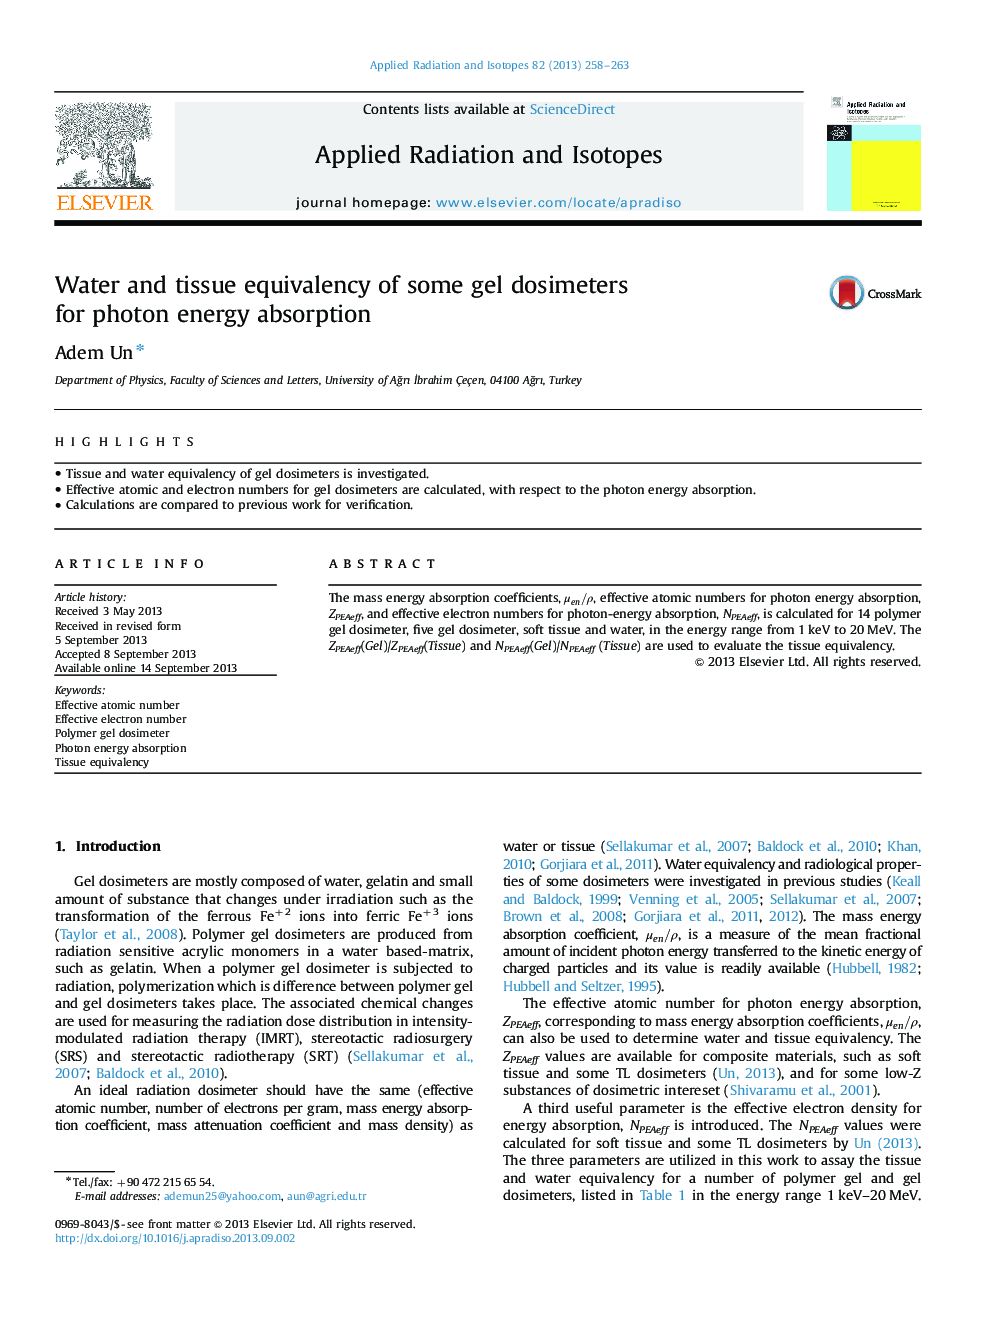 Water and tissue equivalency of some gel dosimeters for photon energy absorption